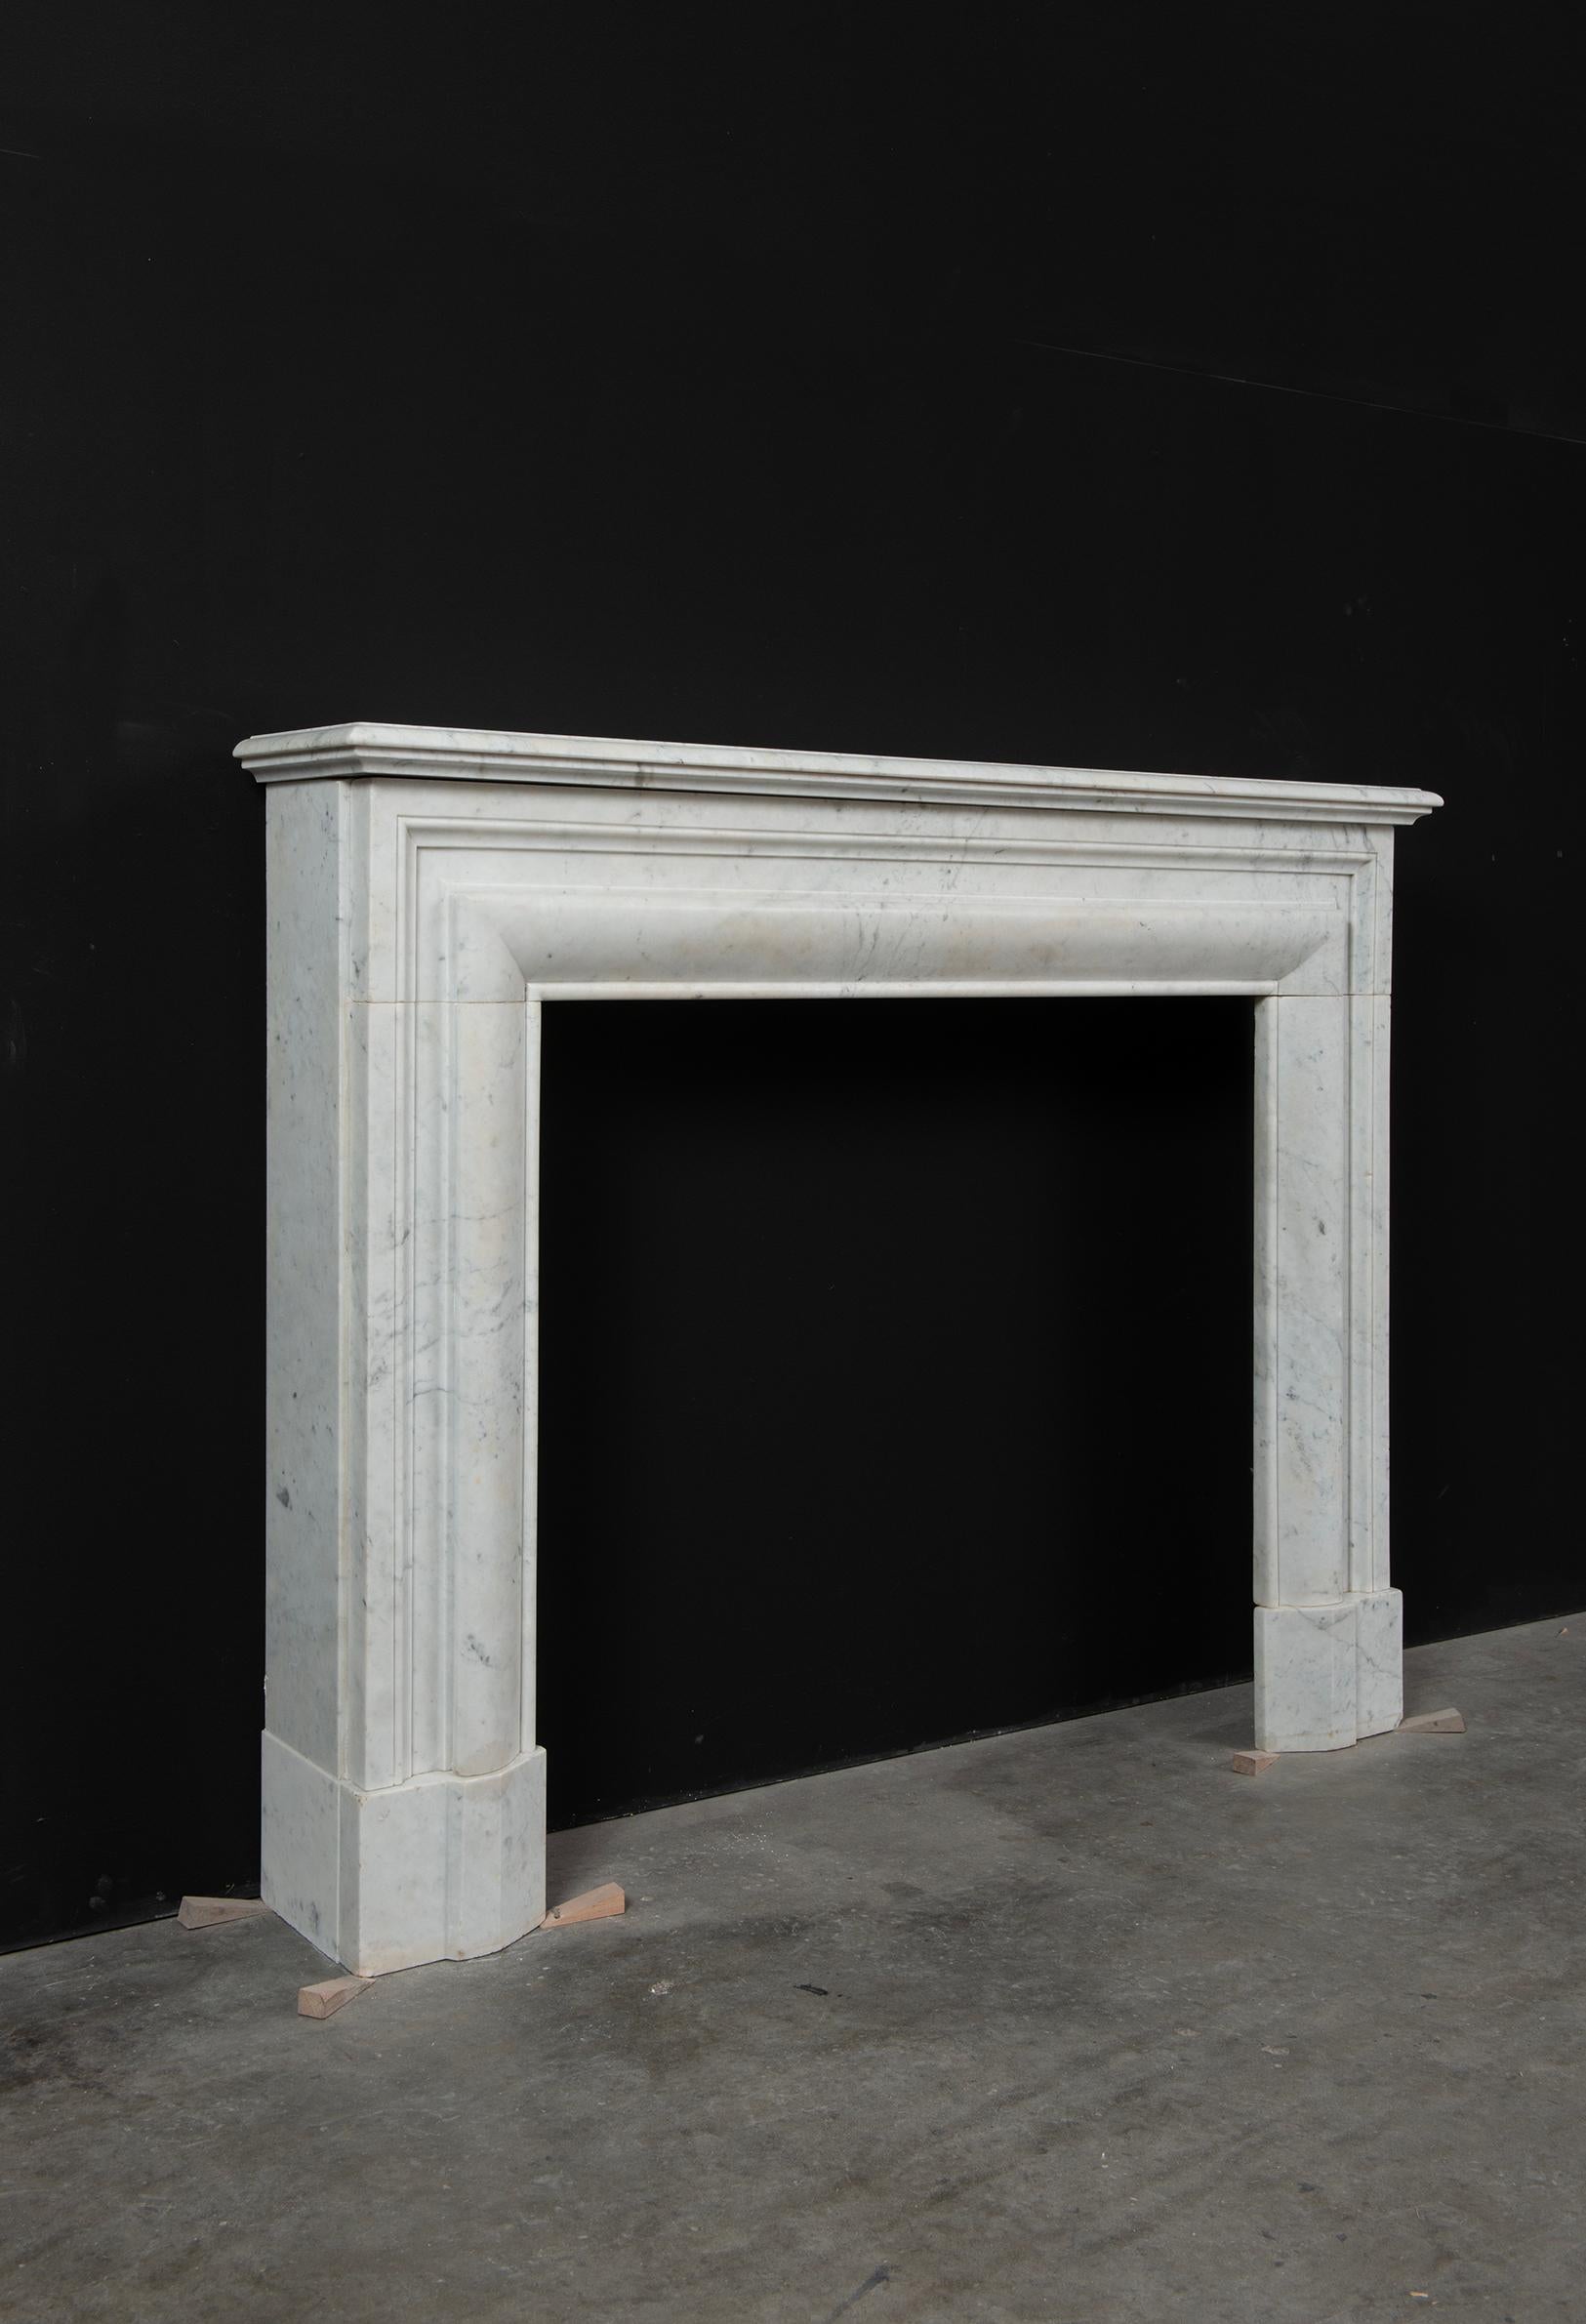 Very nice profiled white marble fireplace from France.
This nice sized 19th century mantel has a nice profiled topshelf above an straight frieze with a strong profile that continuous in the jambs al the way down to the shaped endblocks.

It is in